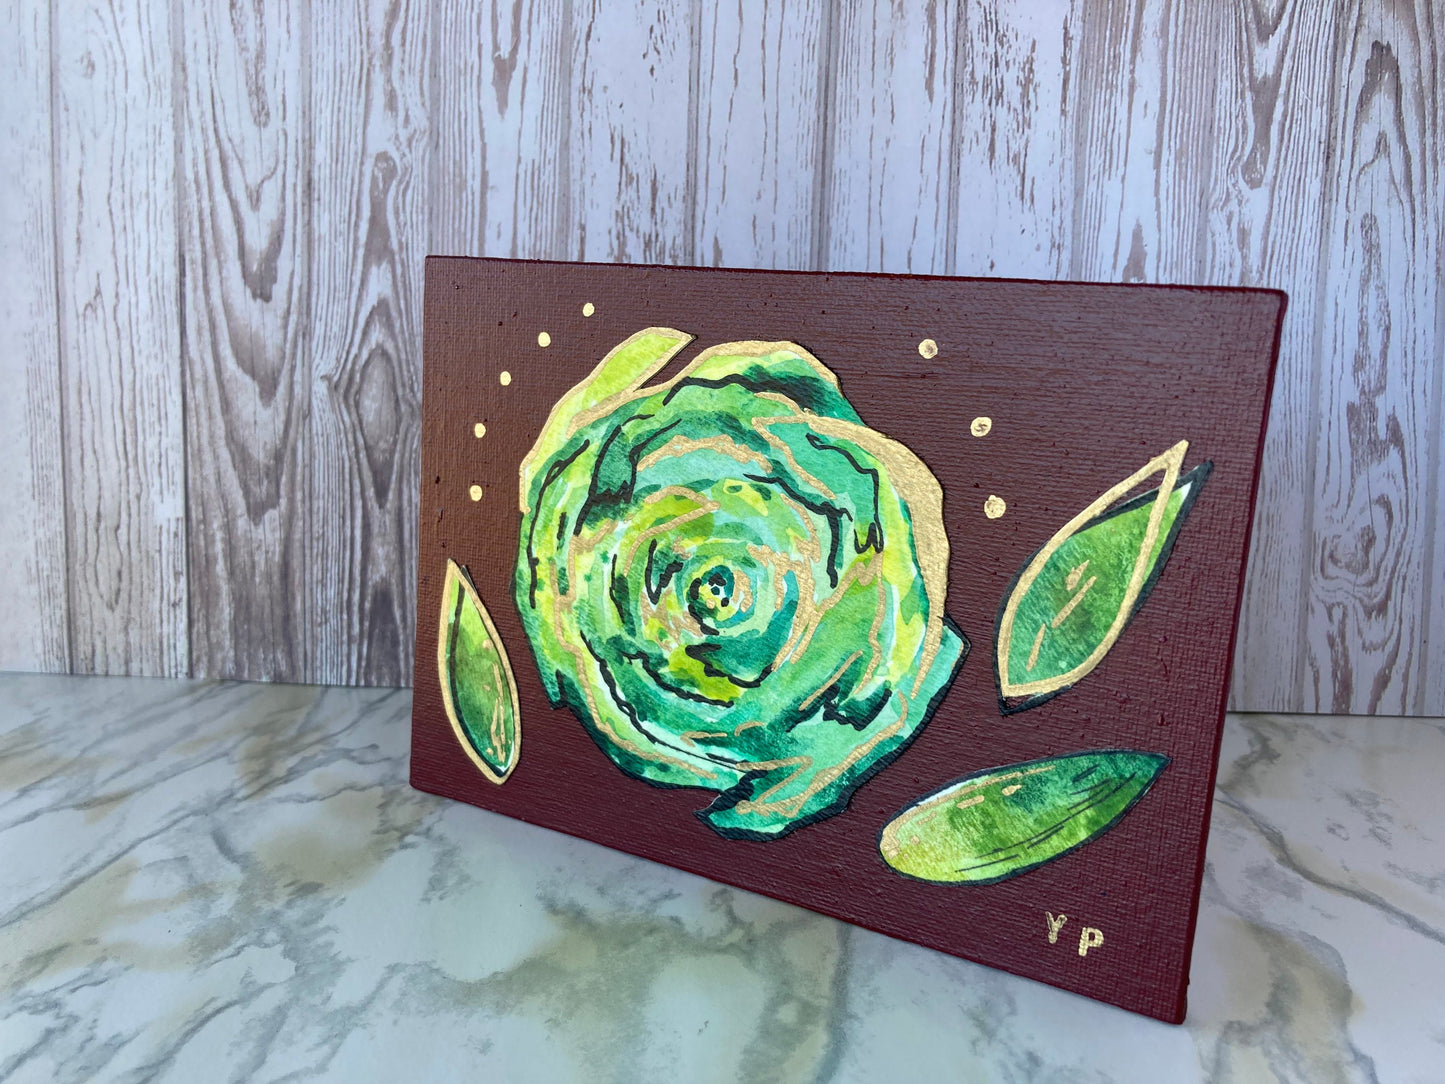 Small Lime Green Doodle Flower, Metallic Gold, Original Painting Collage